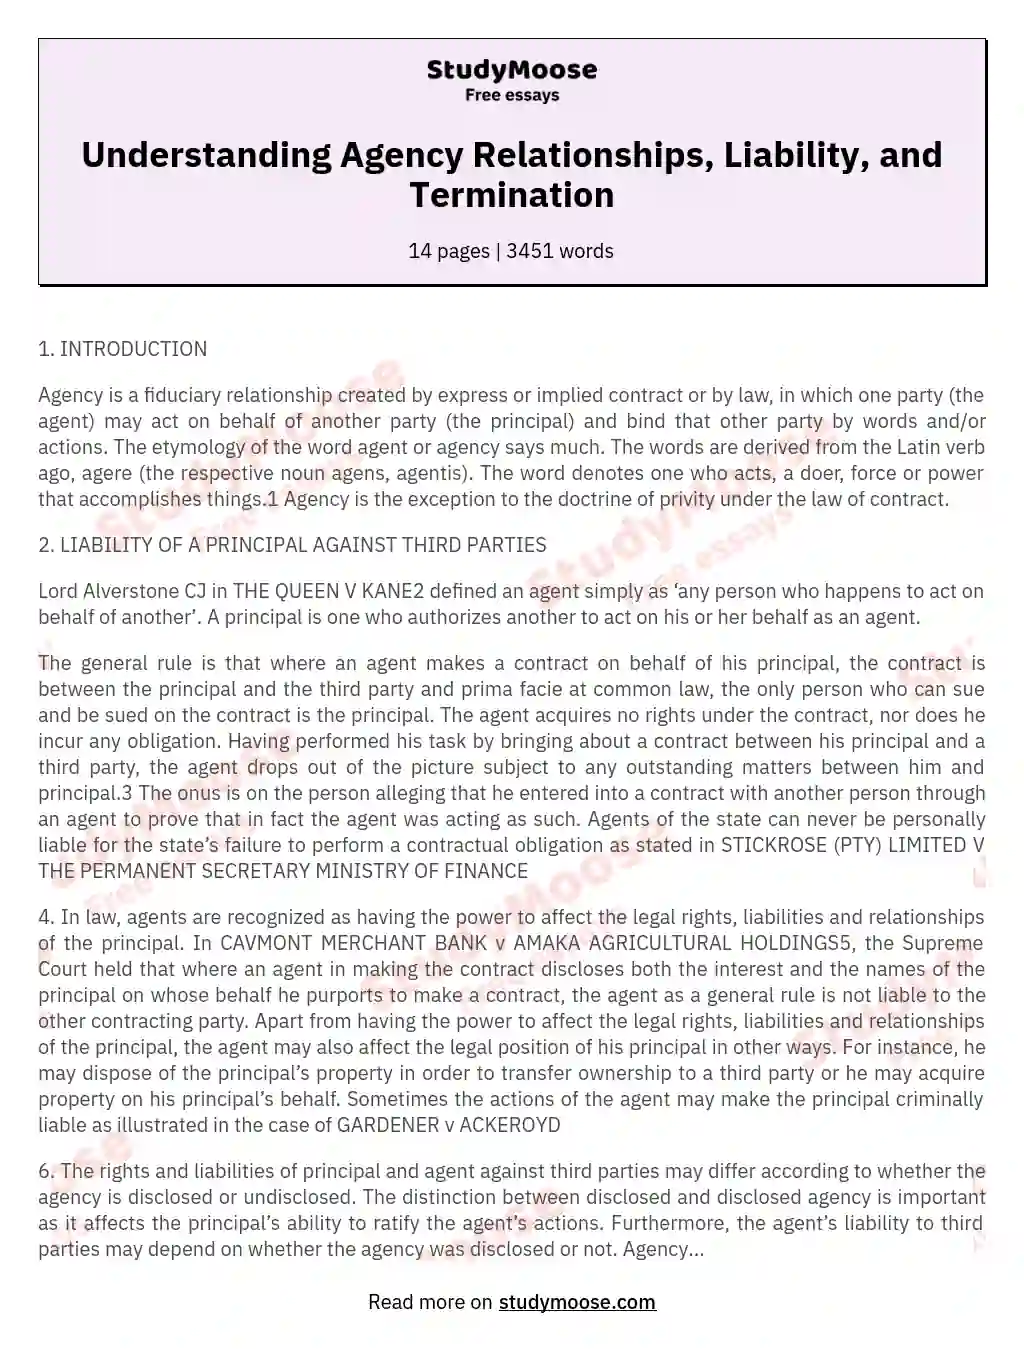 Understanding Agency Relationships, Liability, and Termination essay